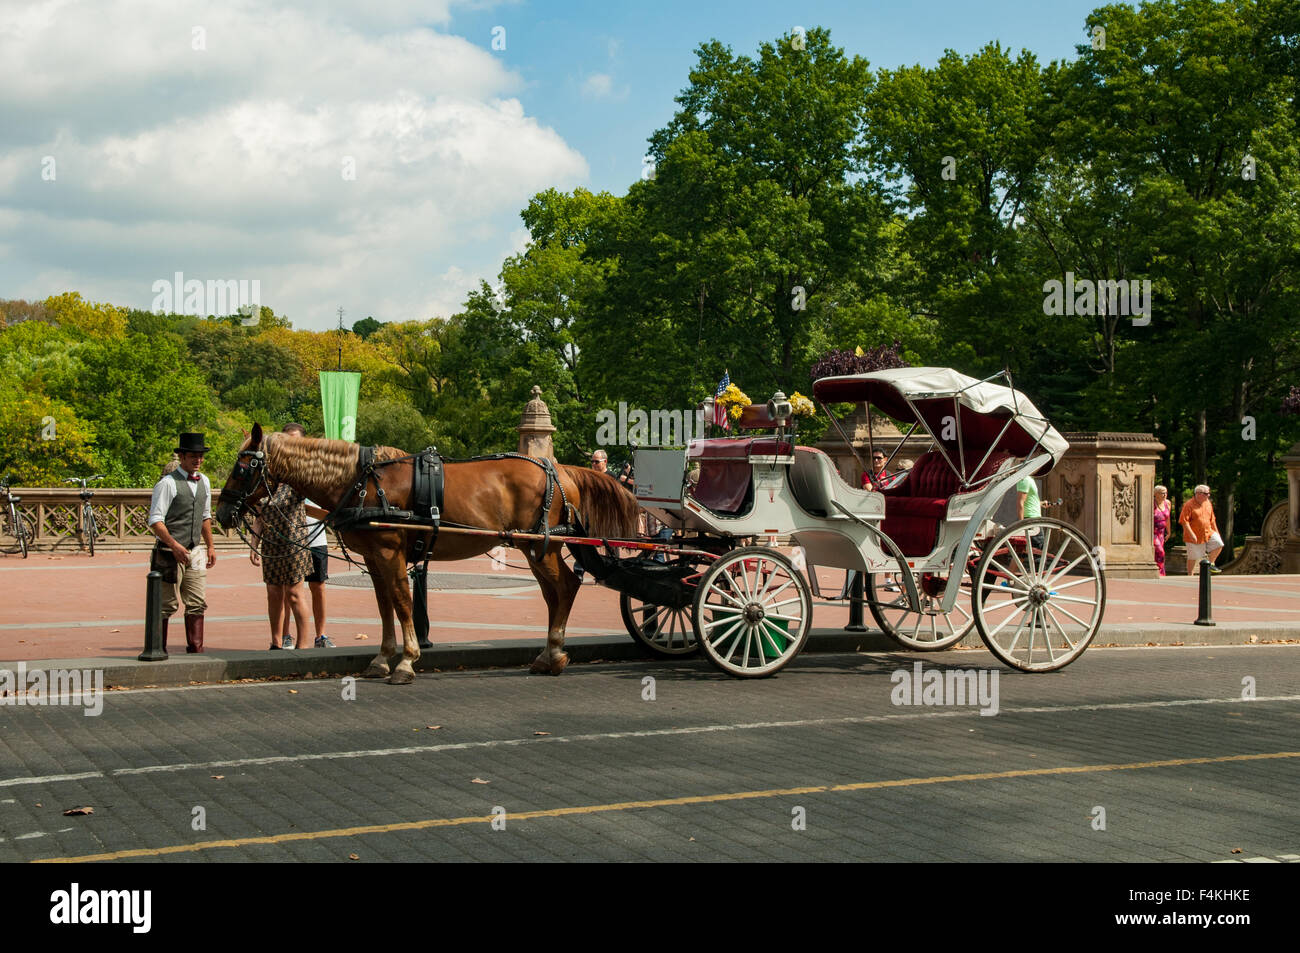 Carriage Ride at Bethesda Terrace, Central Park, New York, USA Stock Photo